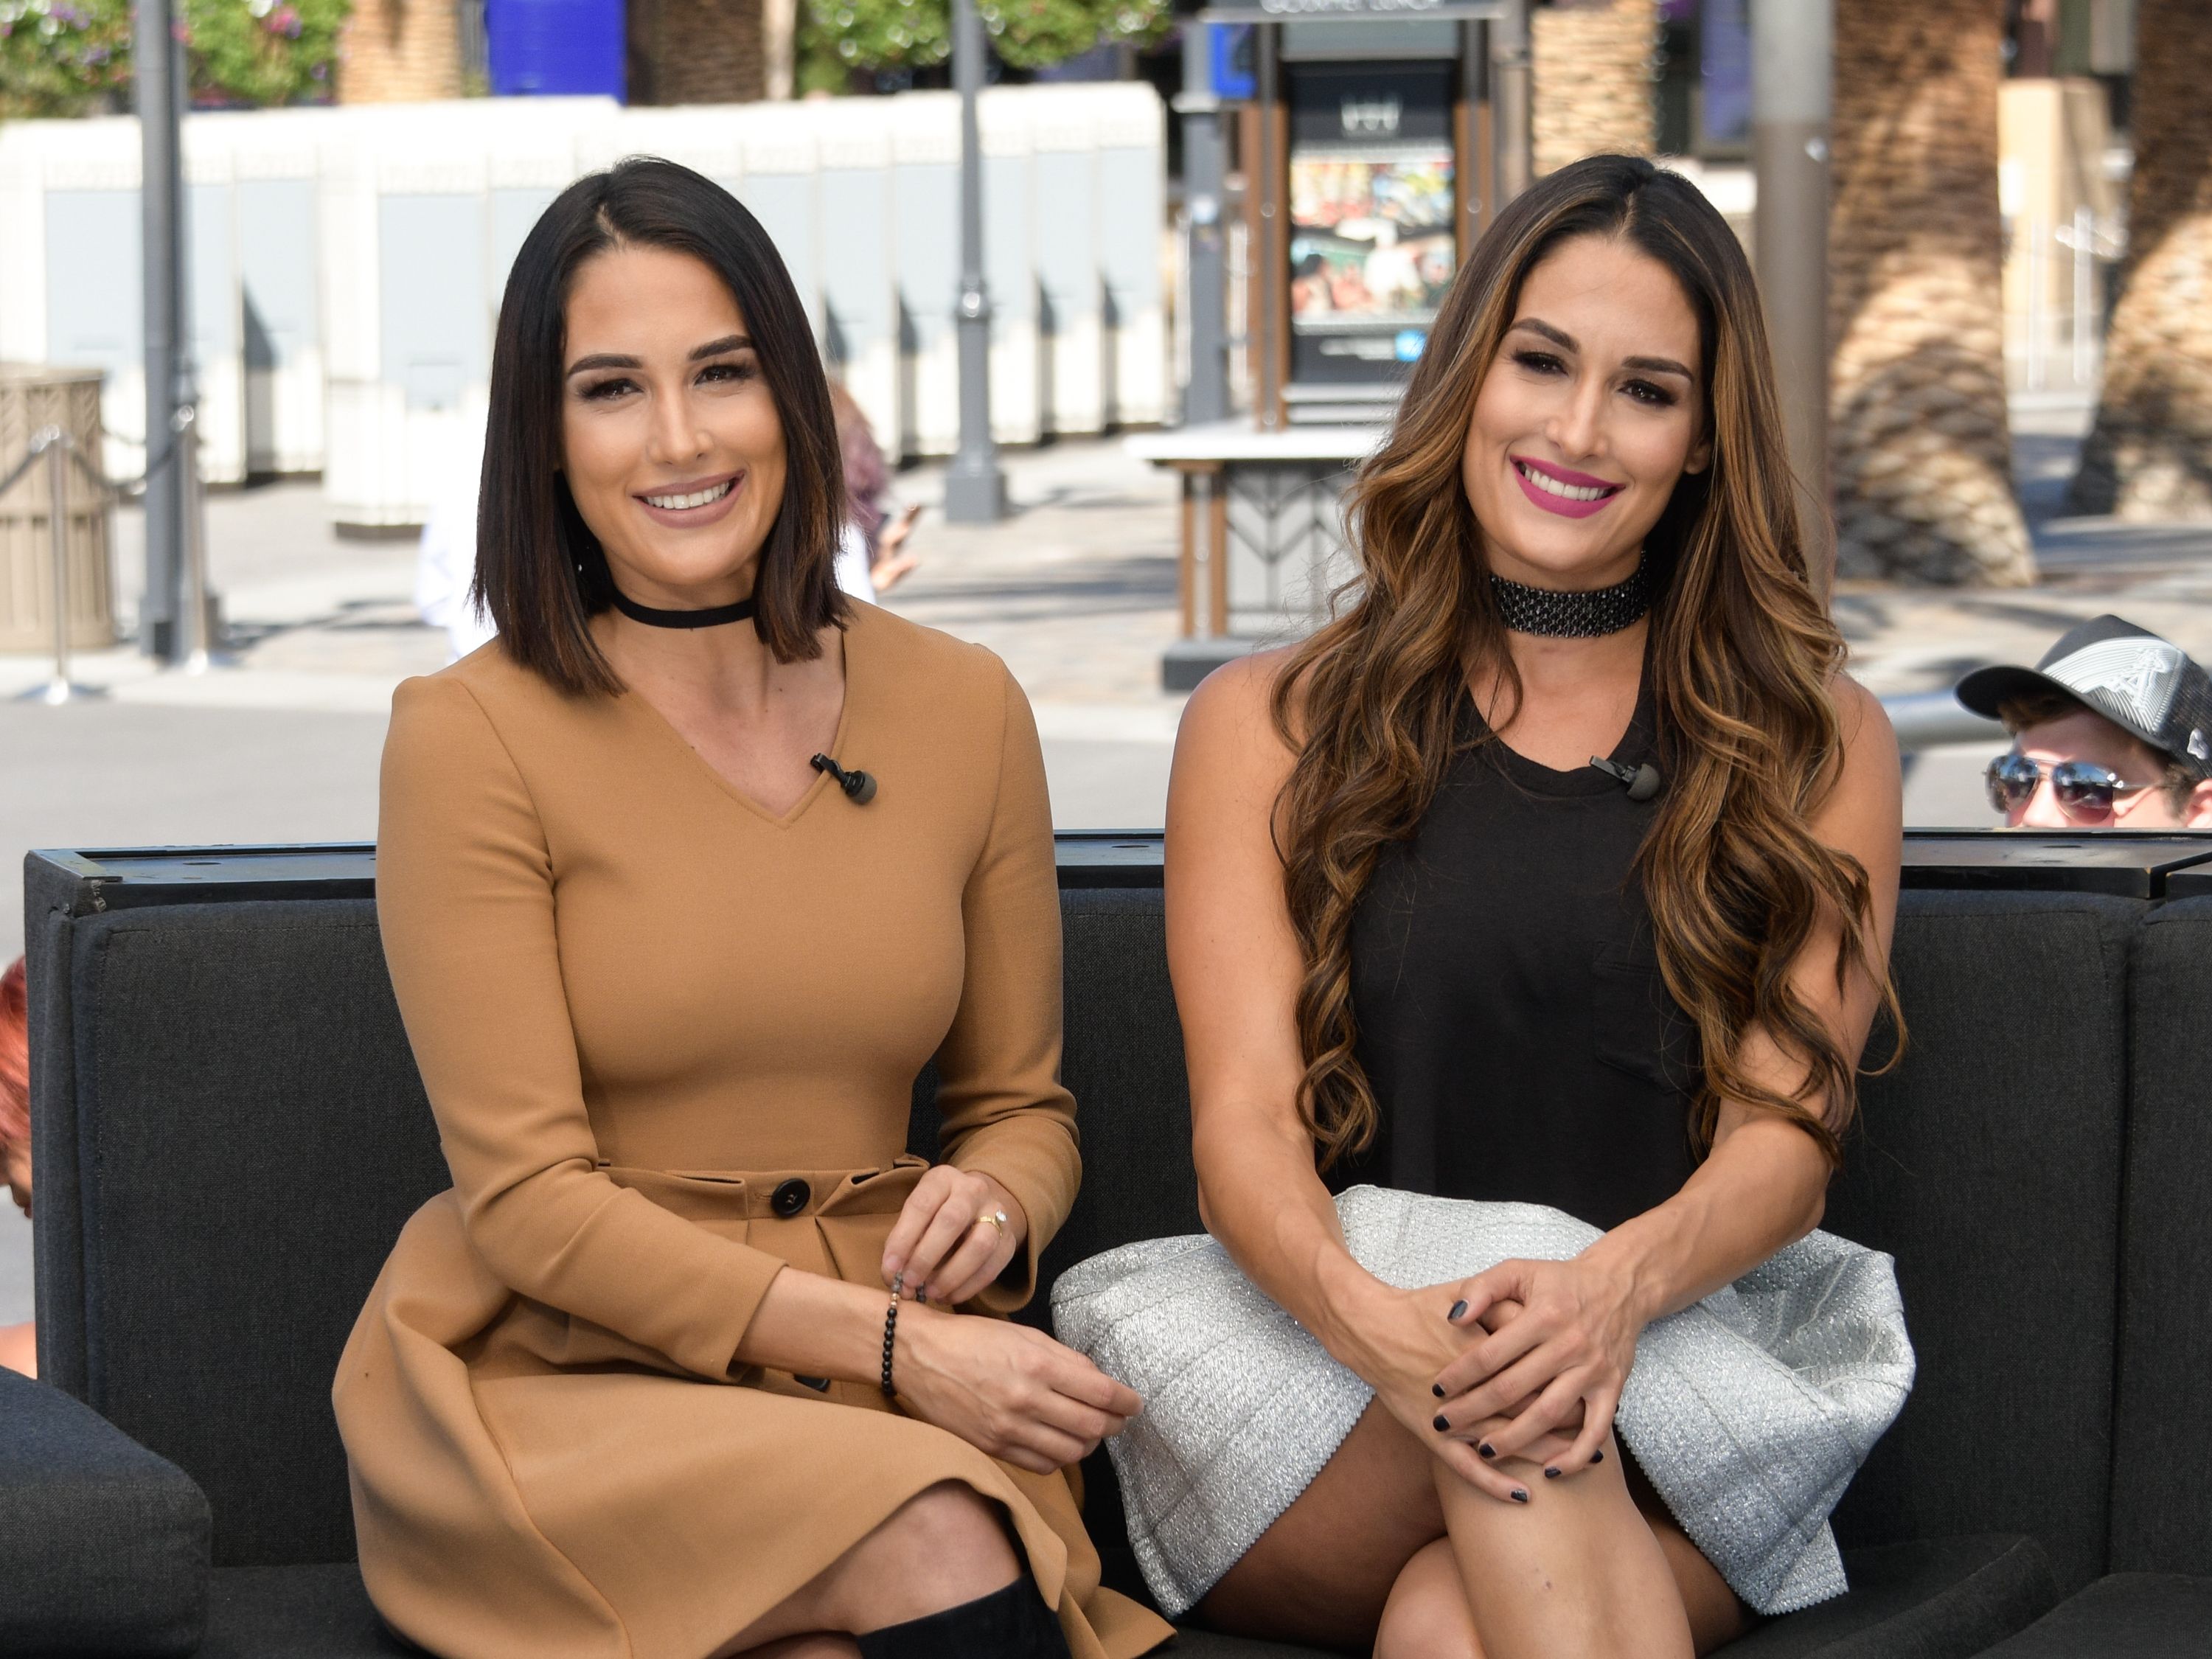 Brie Bella and Nikki Bella visit "Extra" at Universal Studios Hollywood on October 3, 2016 | Photo: Getty Images